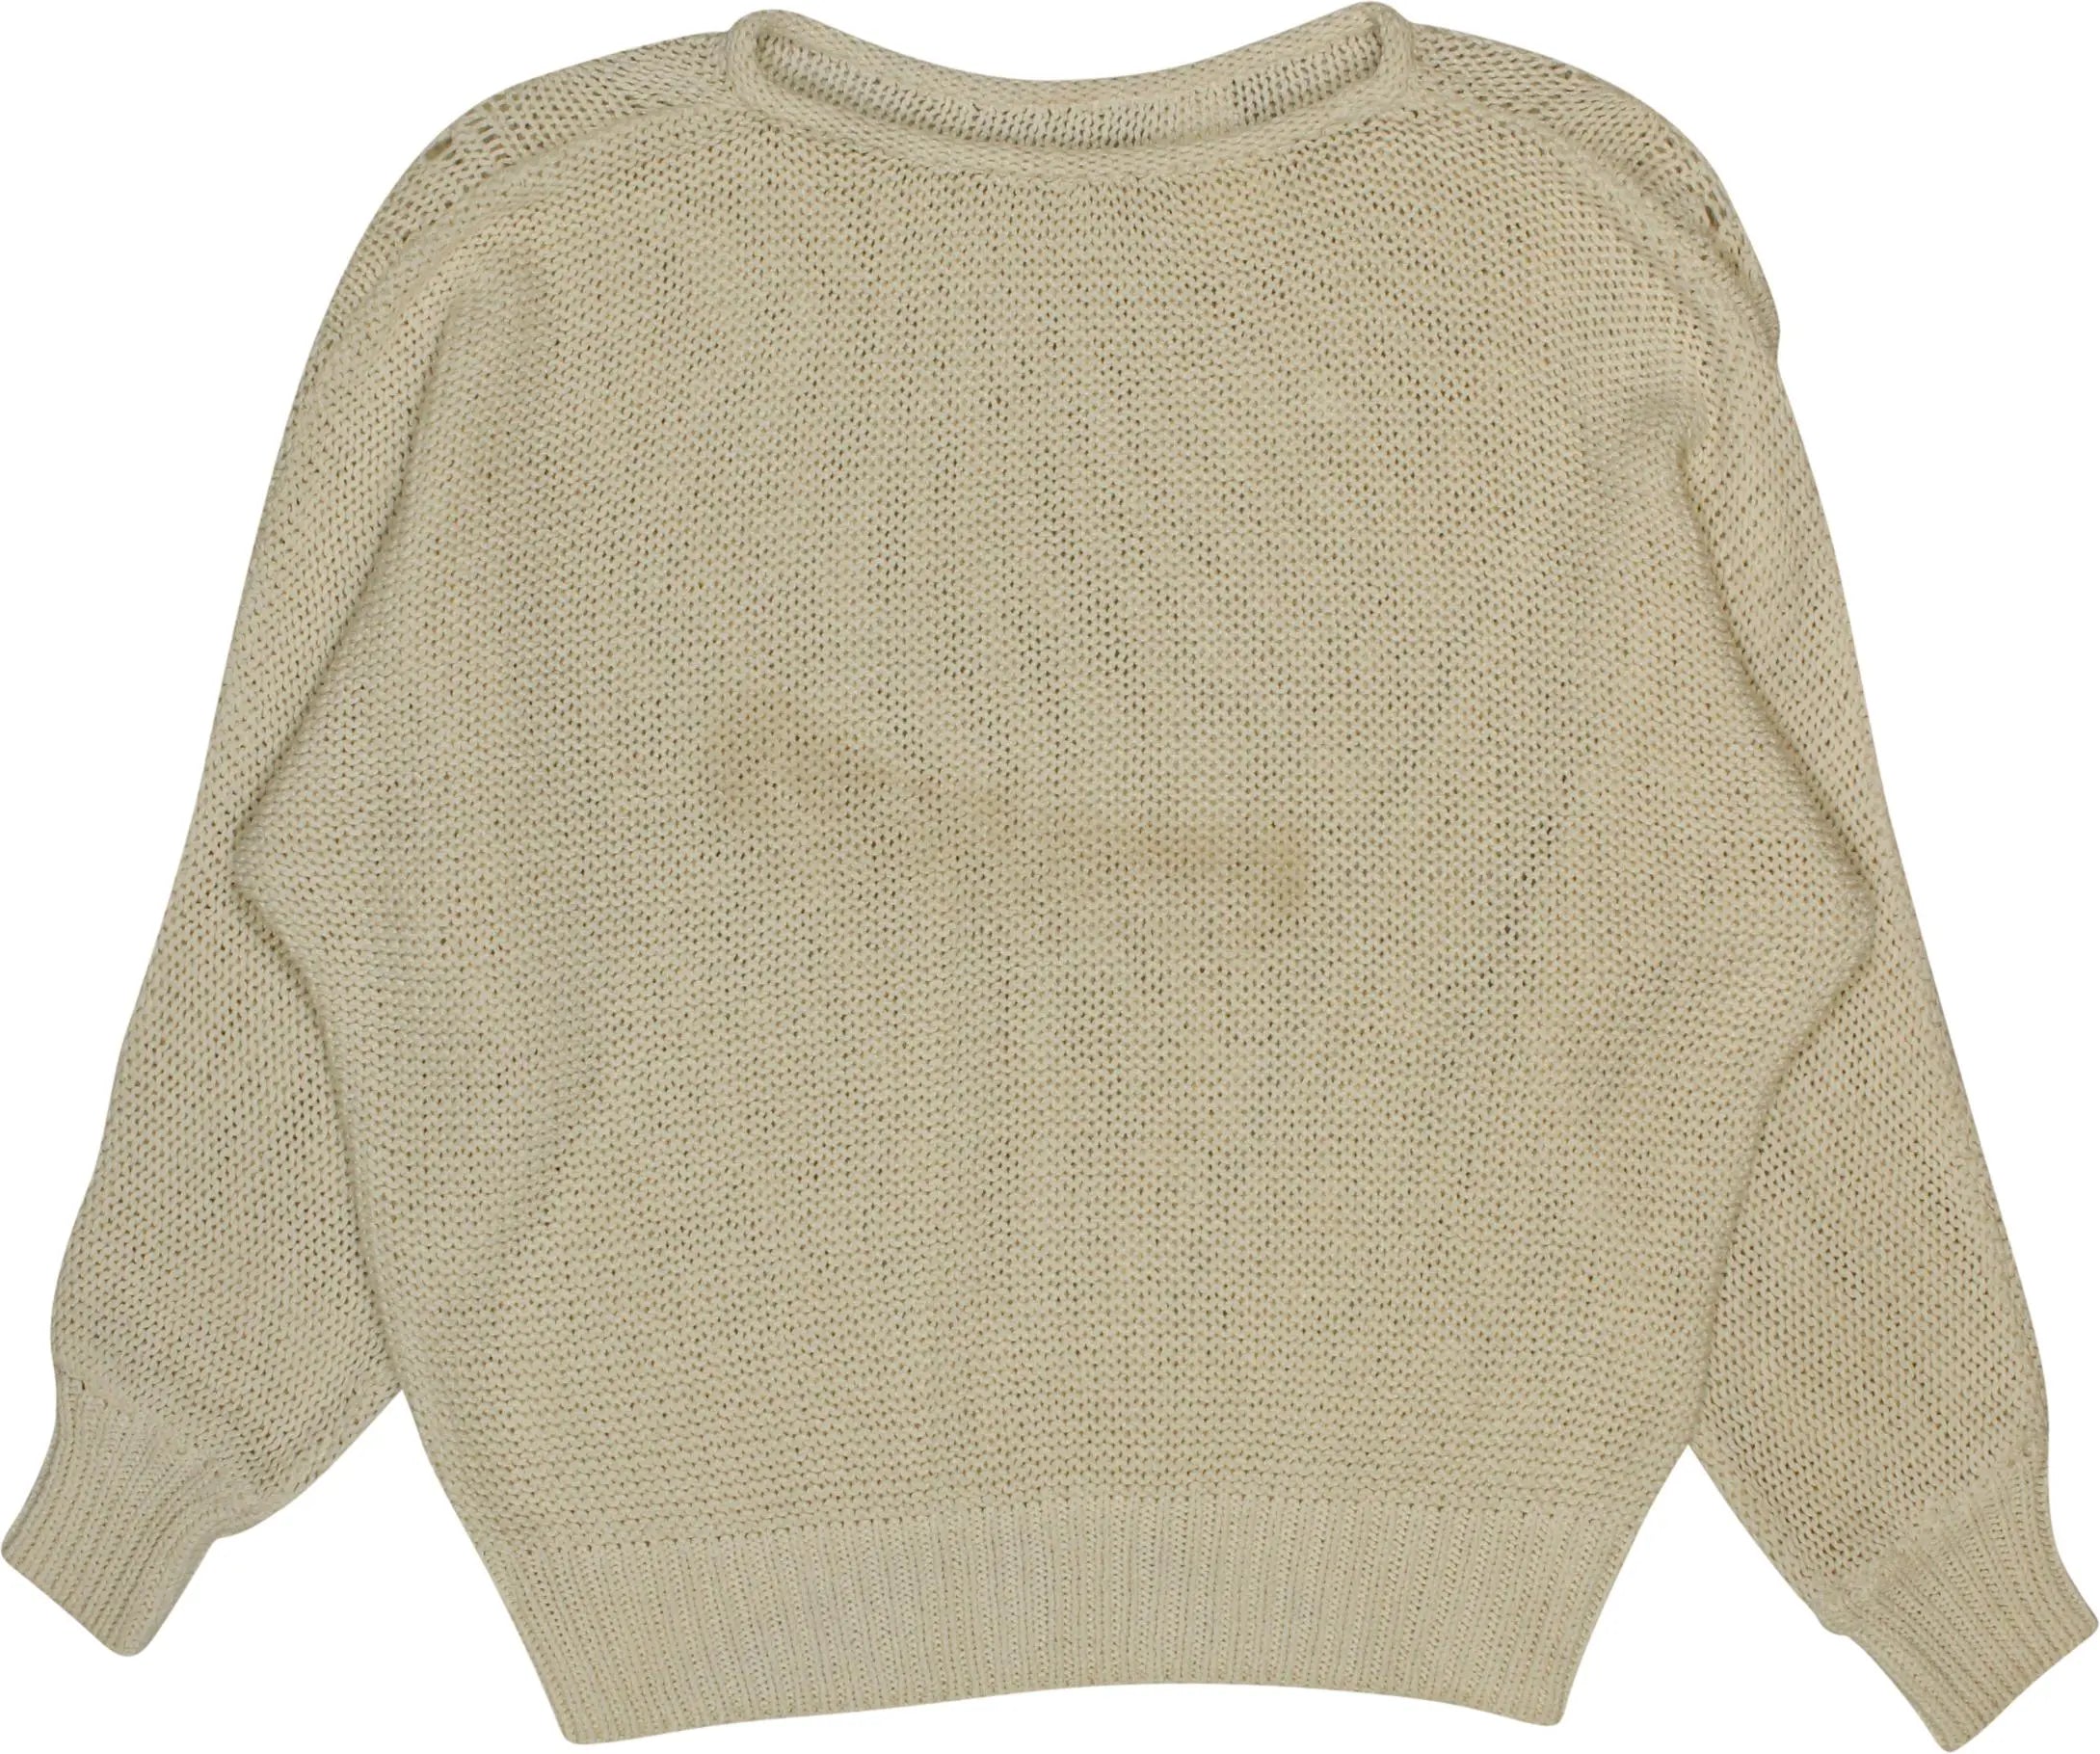 Unknown - 80s Jumper- ThriftTale.com - Vintage and second handclothing